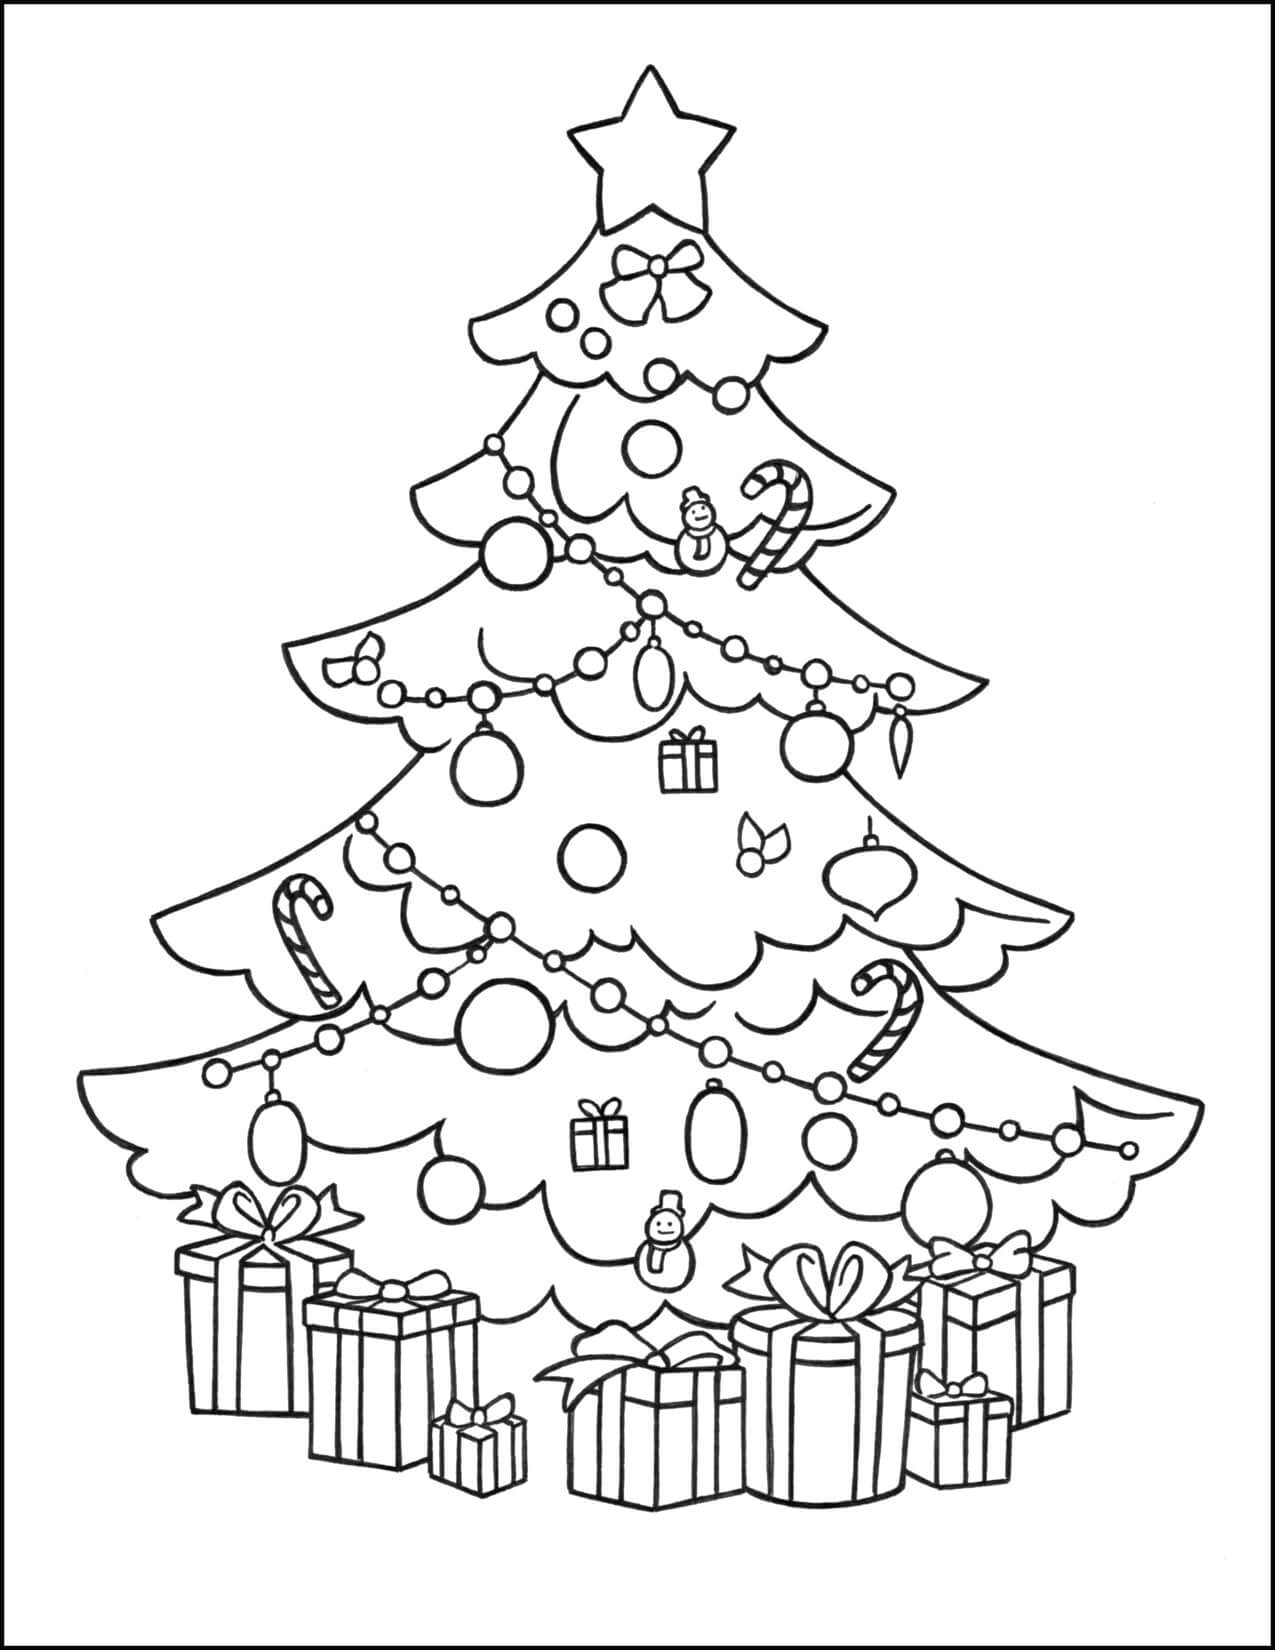 normal-tree-coloring-page-free-printable-coloring-pages-for-kids